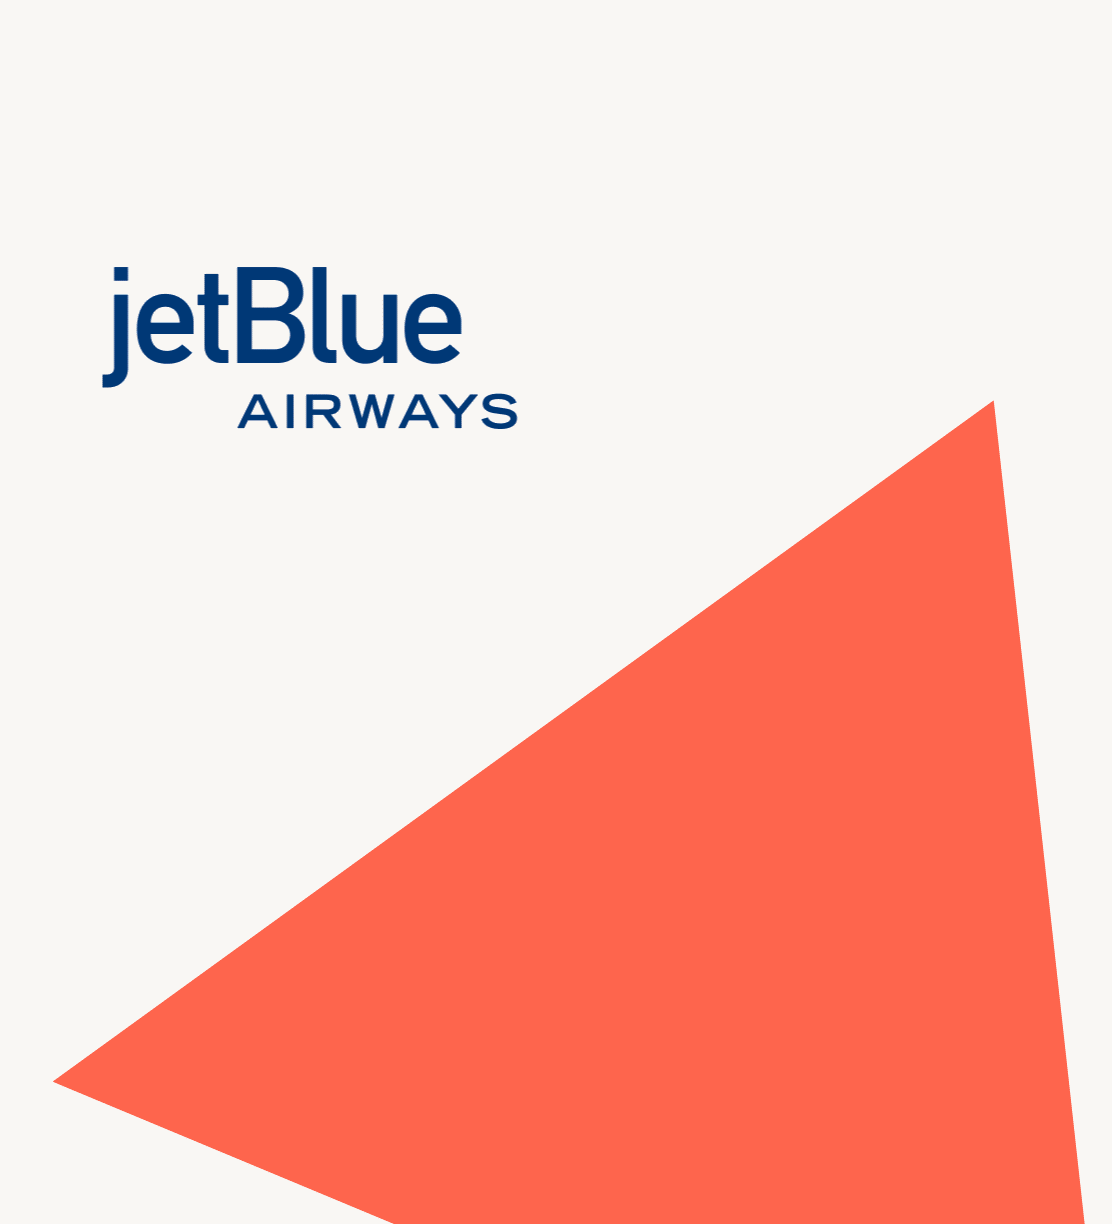 JetBlue airplane logo in colorful gradient.